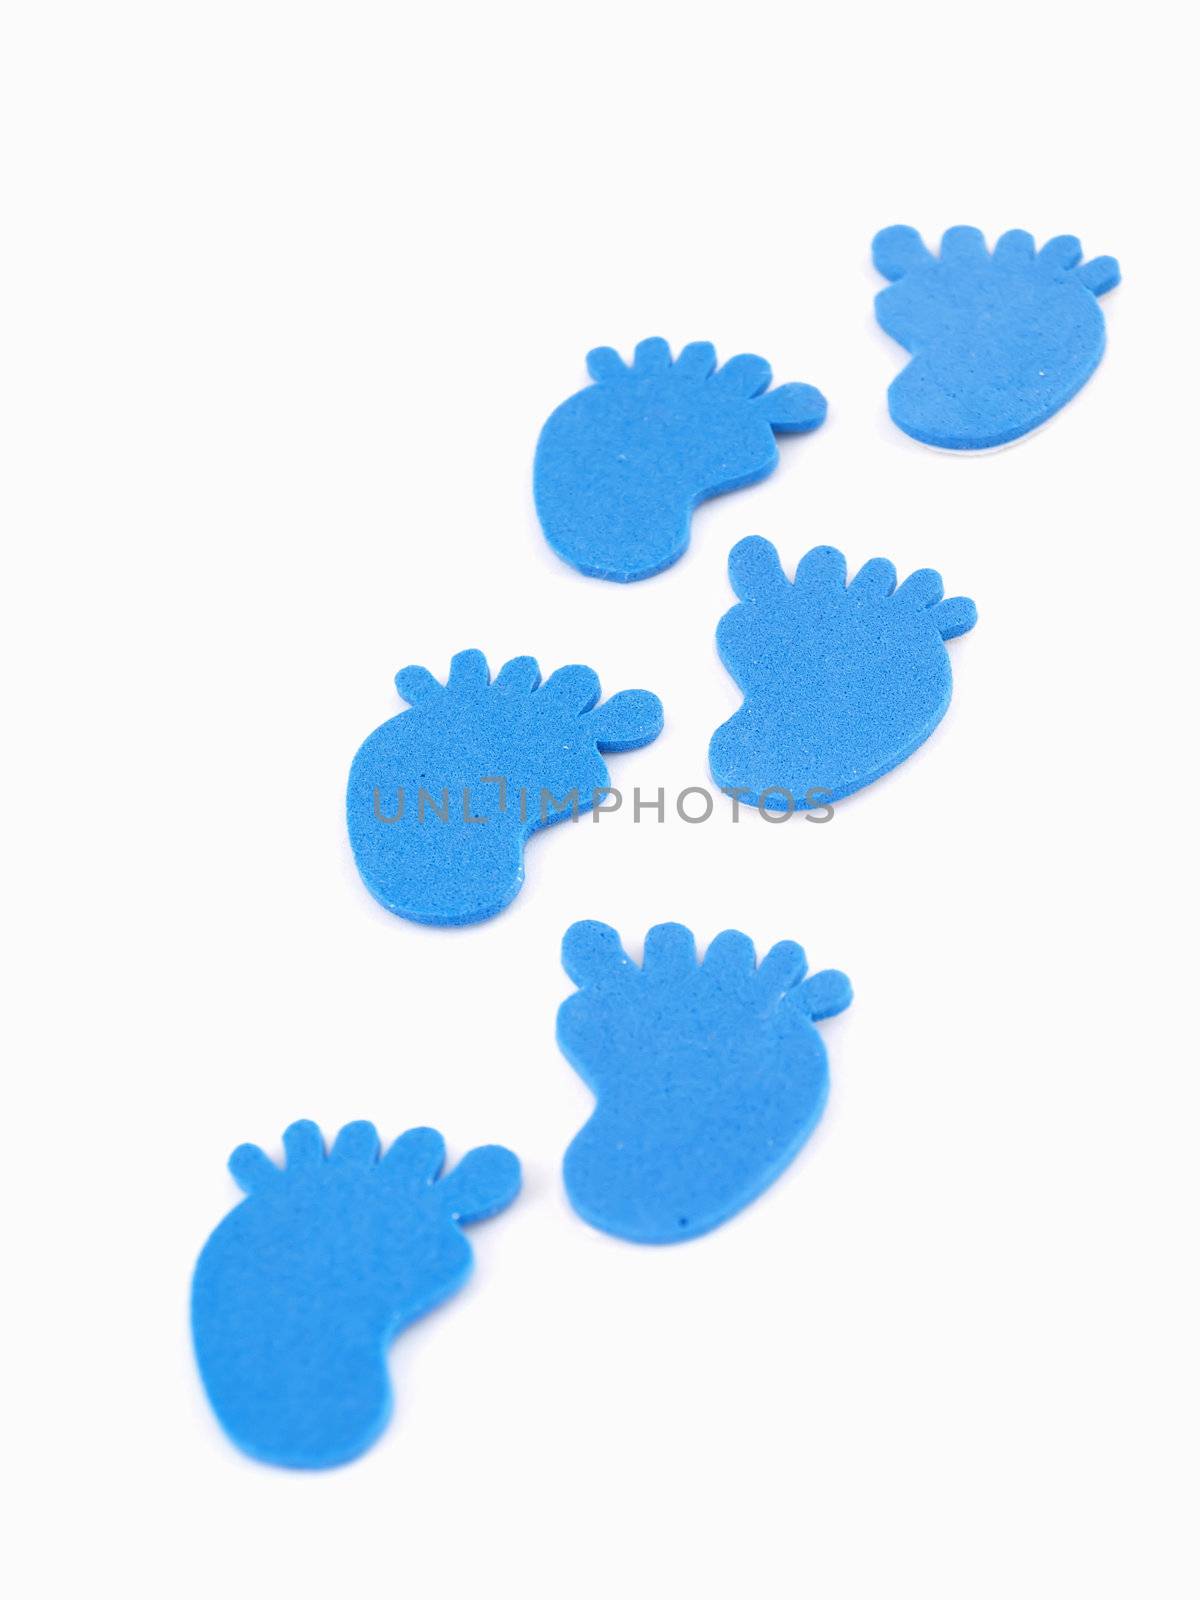 6 blue foam footprints in a trail isolated on a white back ground